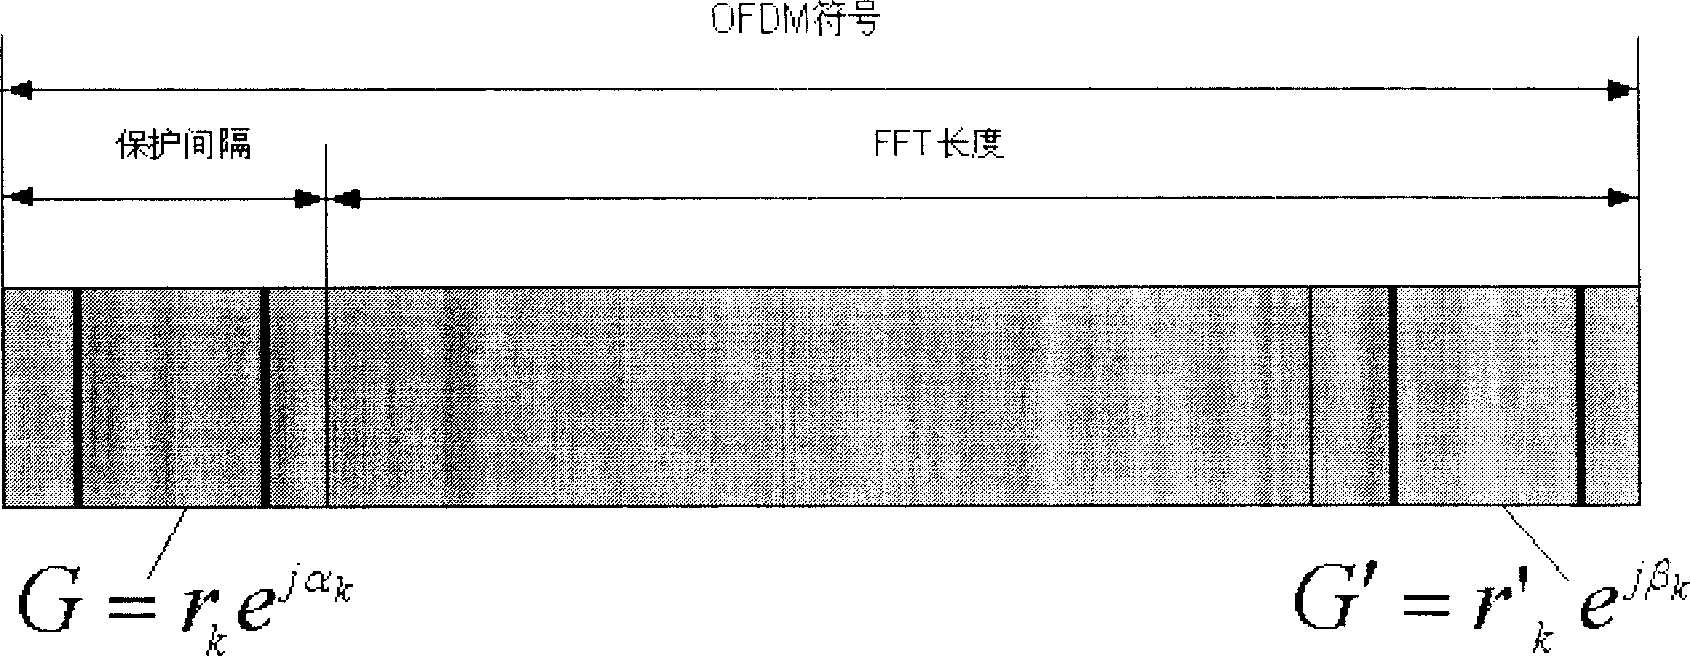 Large frequency deviation evaluation and correction method of orthogonal frequency multiplexing signal carrier